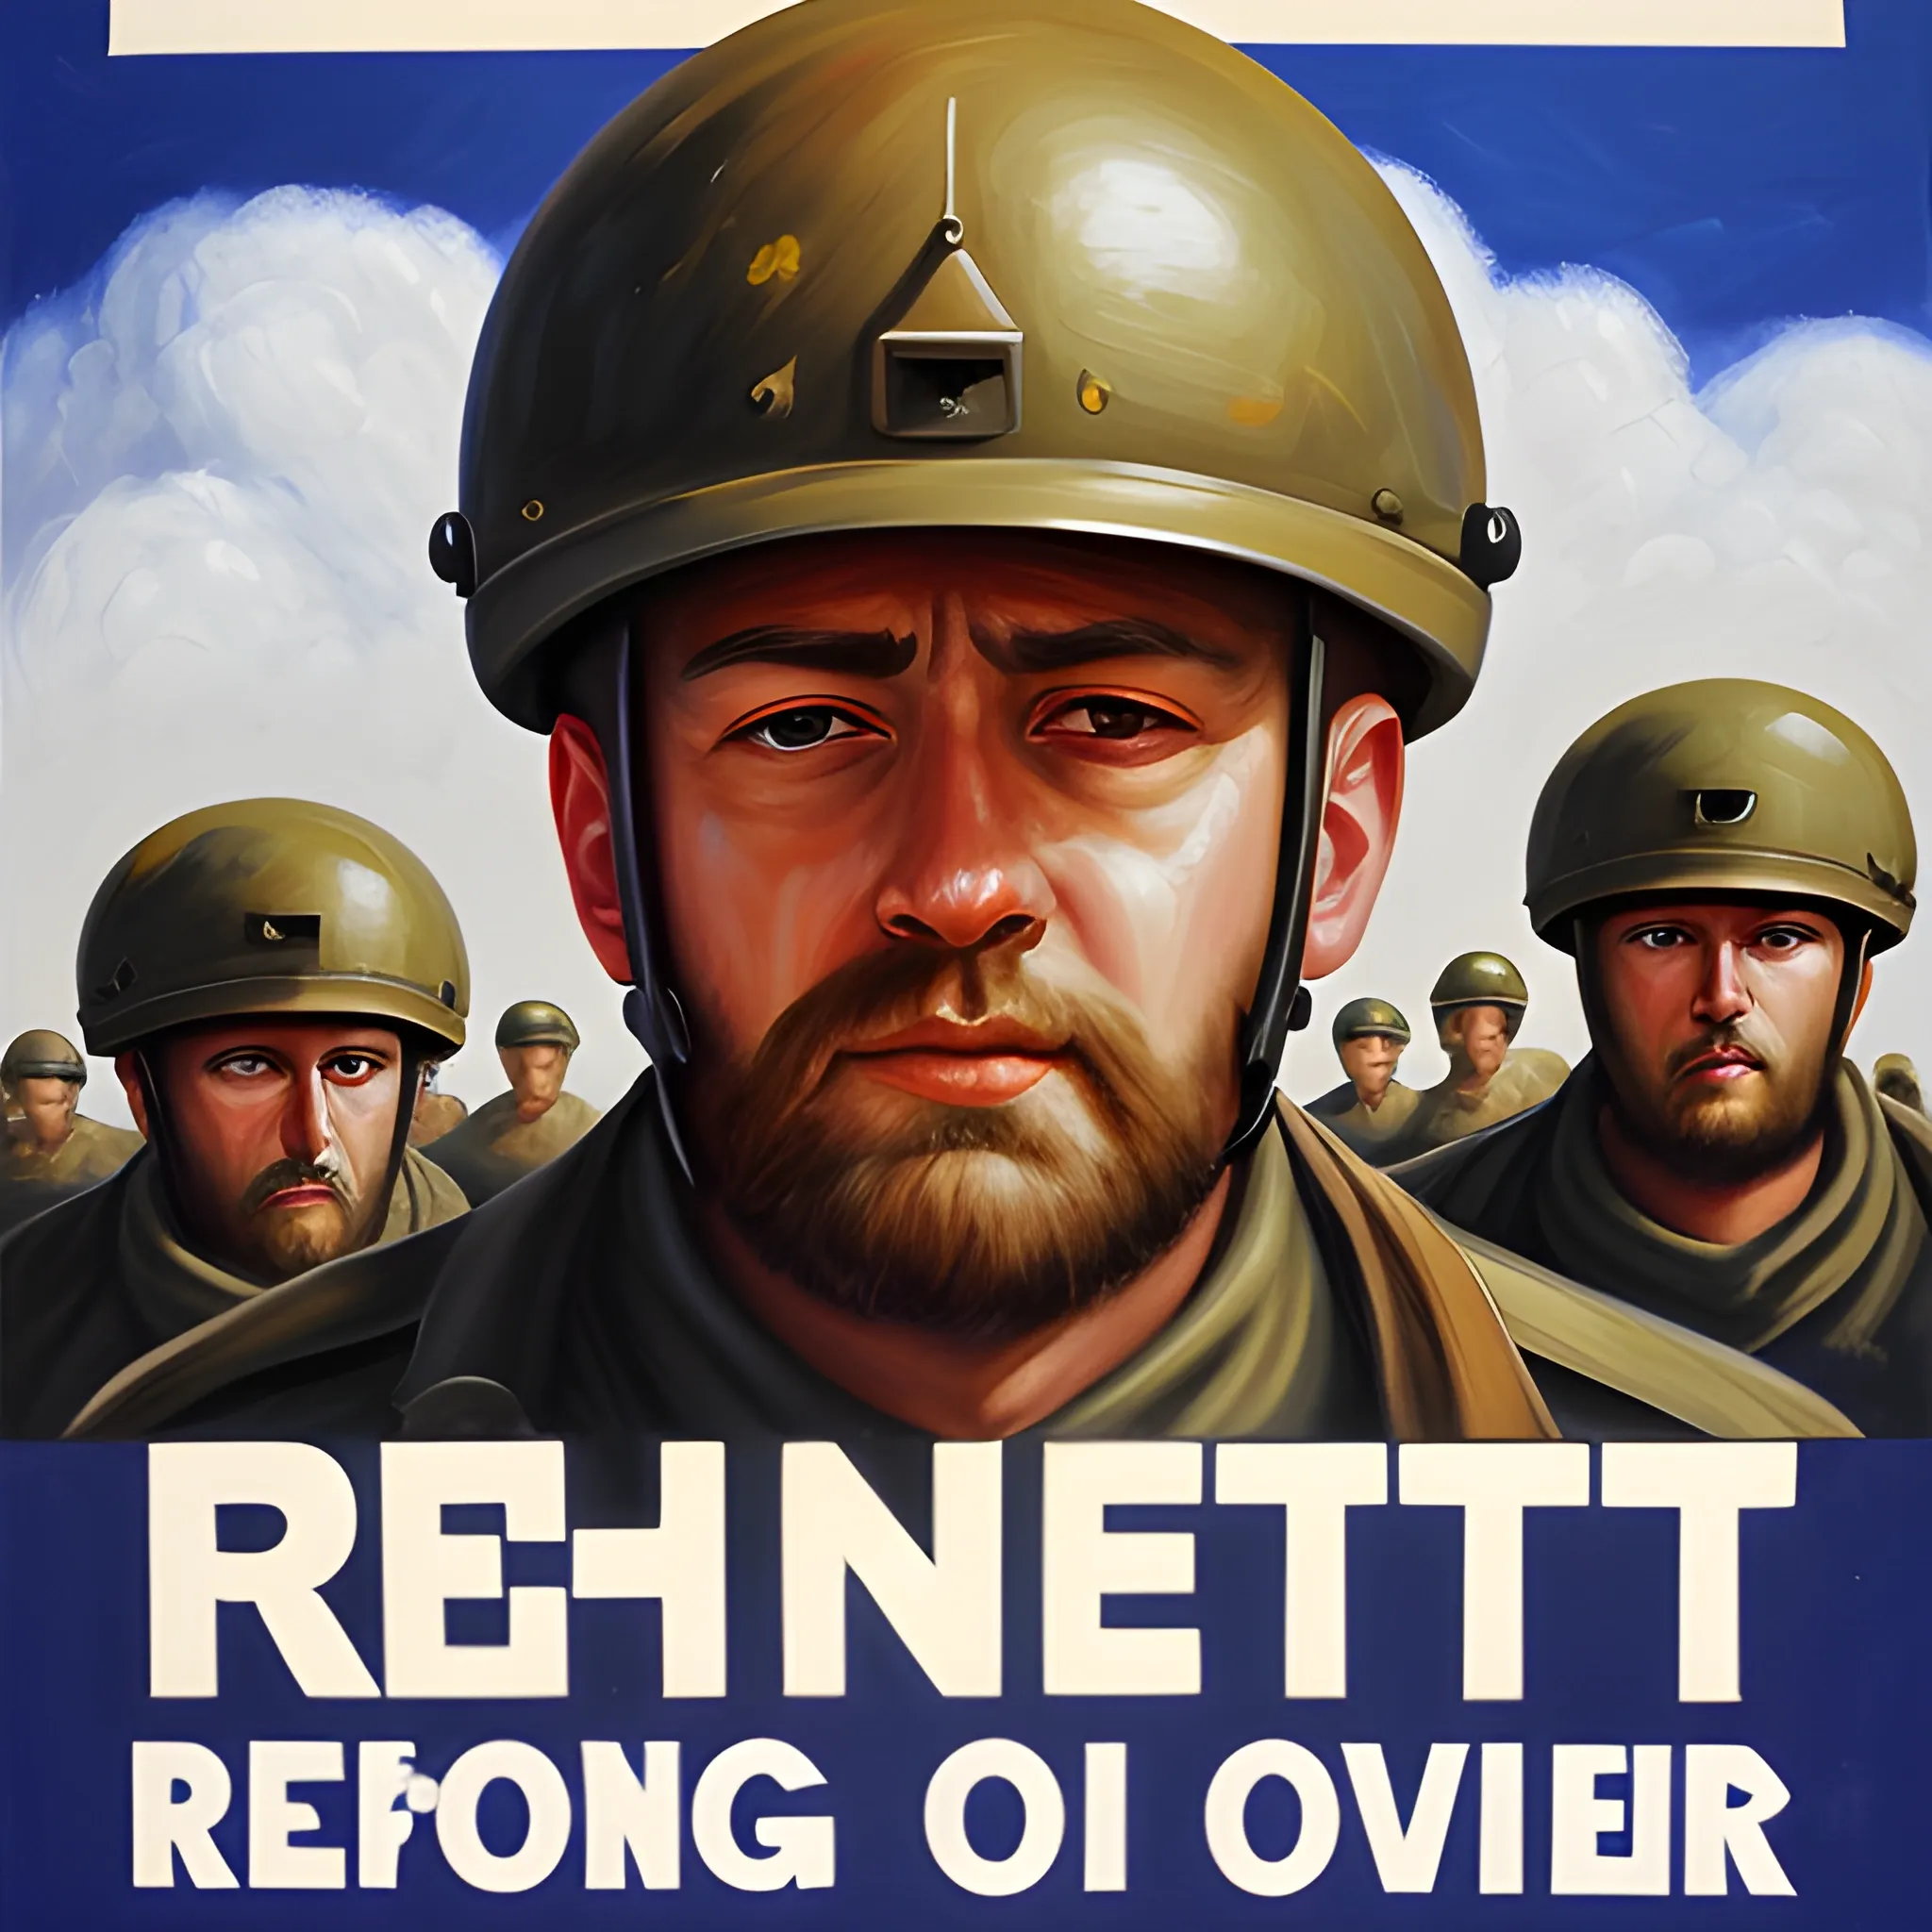 Recruitment poster, Oil Painting